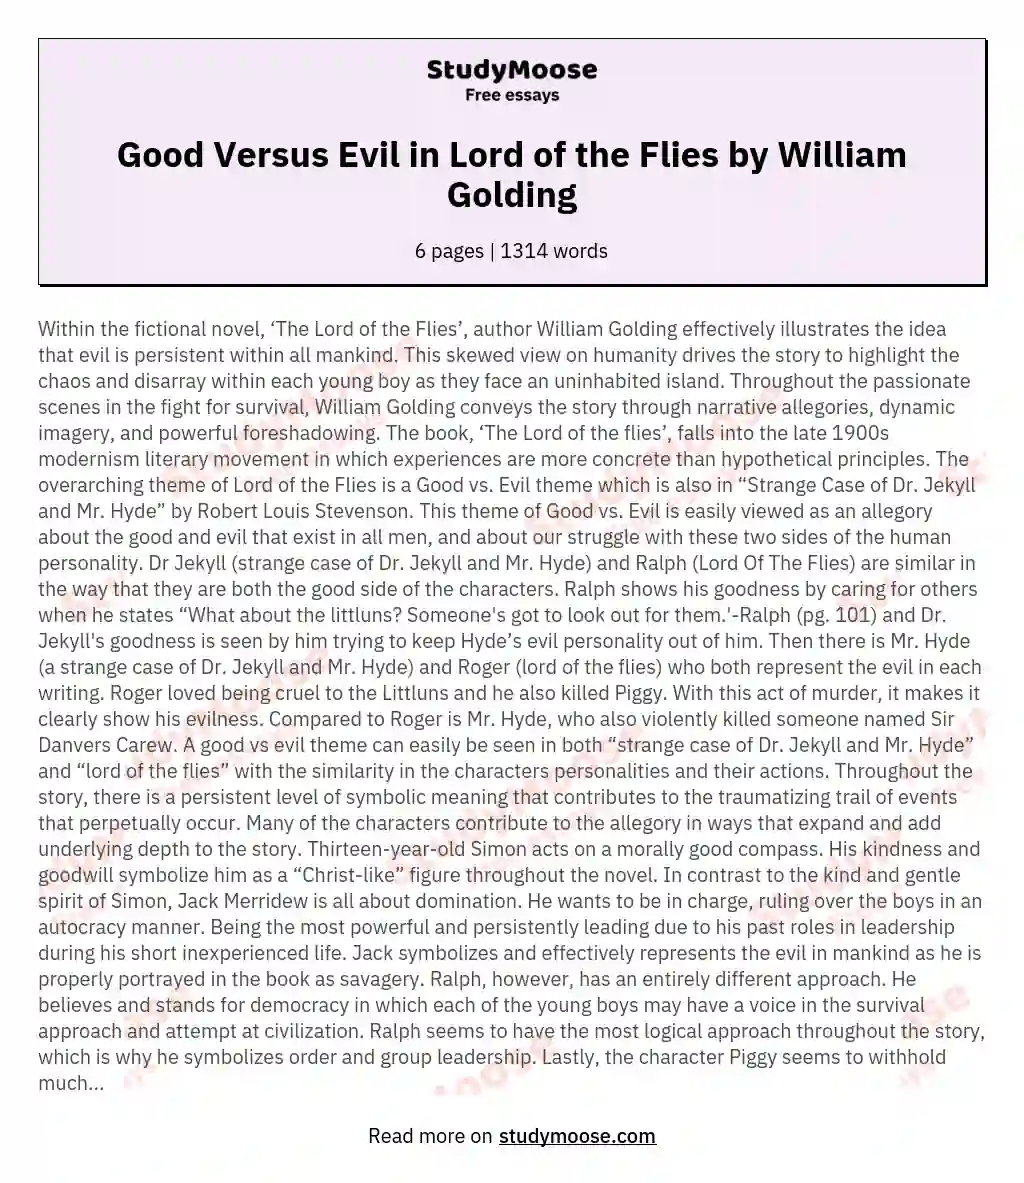 Good Versus Evil in Lord of the Flies by William Golding